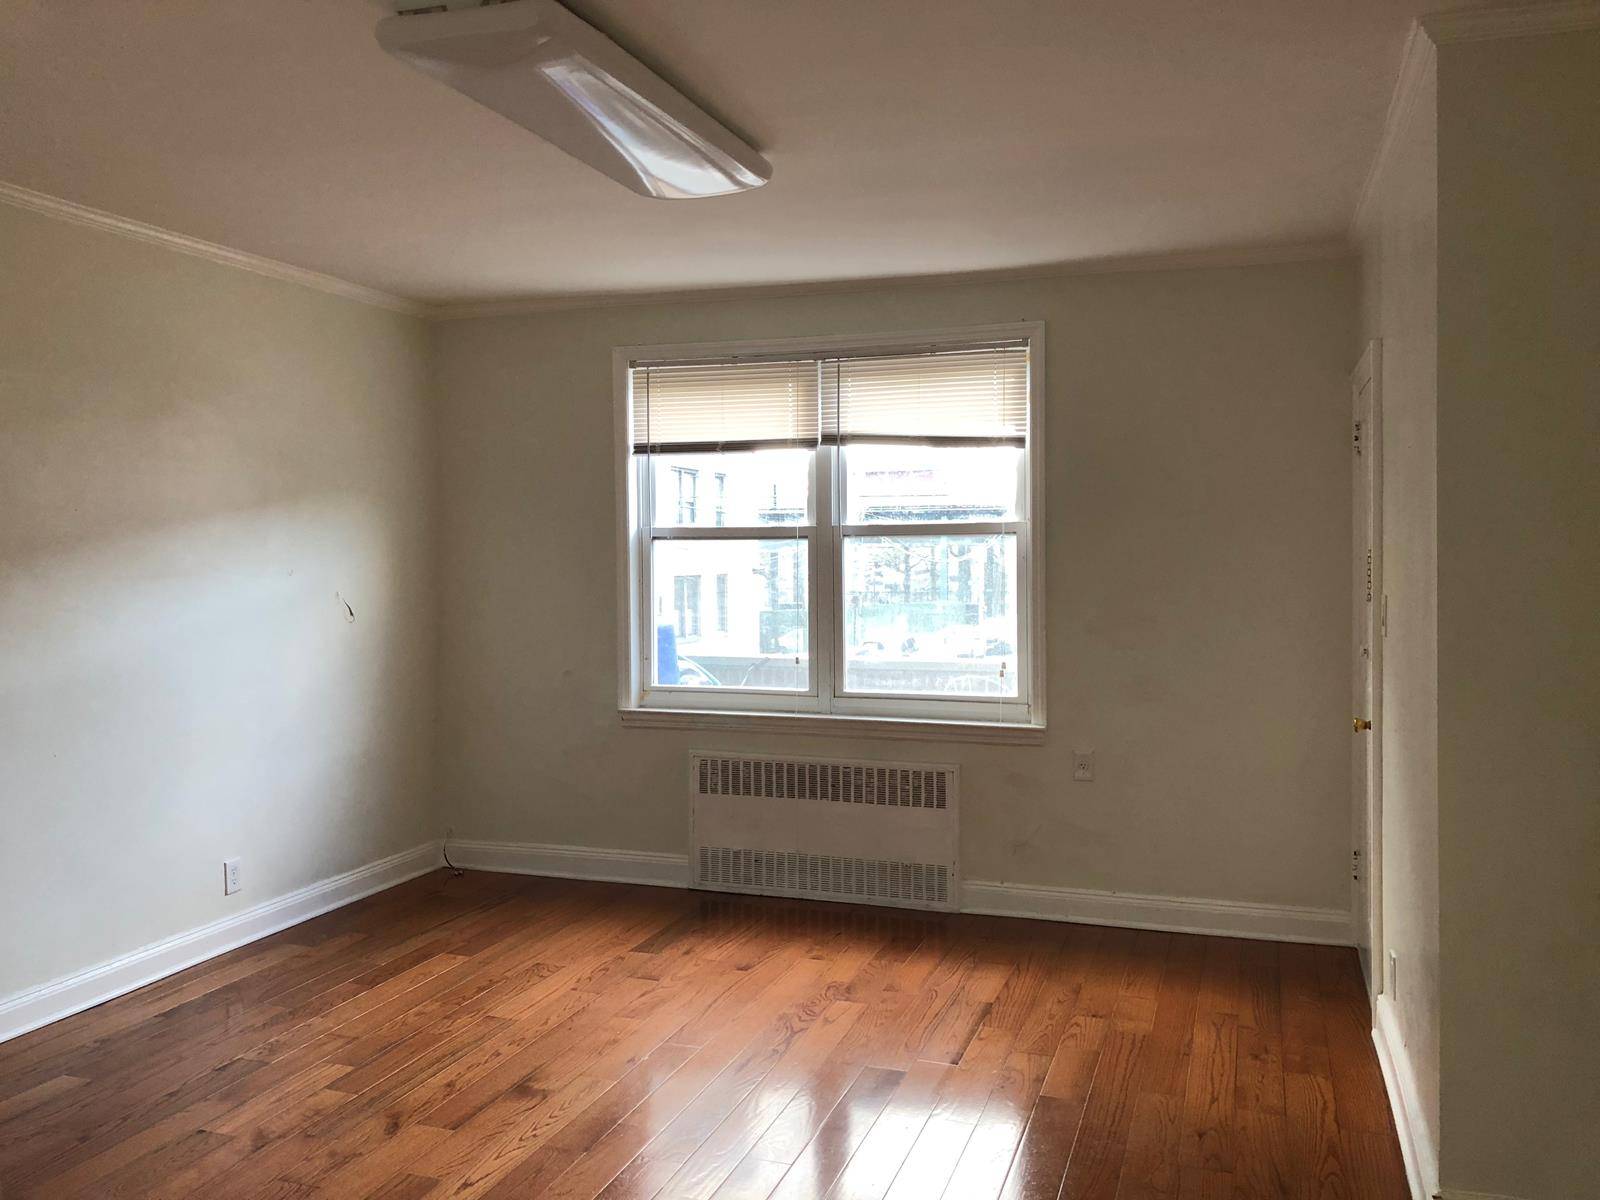 A well maintained building is charmingly situated on a tree lined block located in the heart of Astoria just one block from N train.